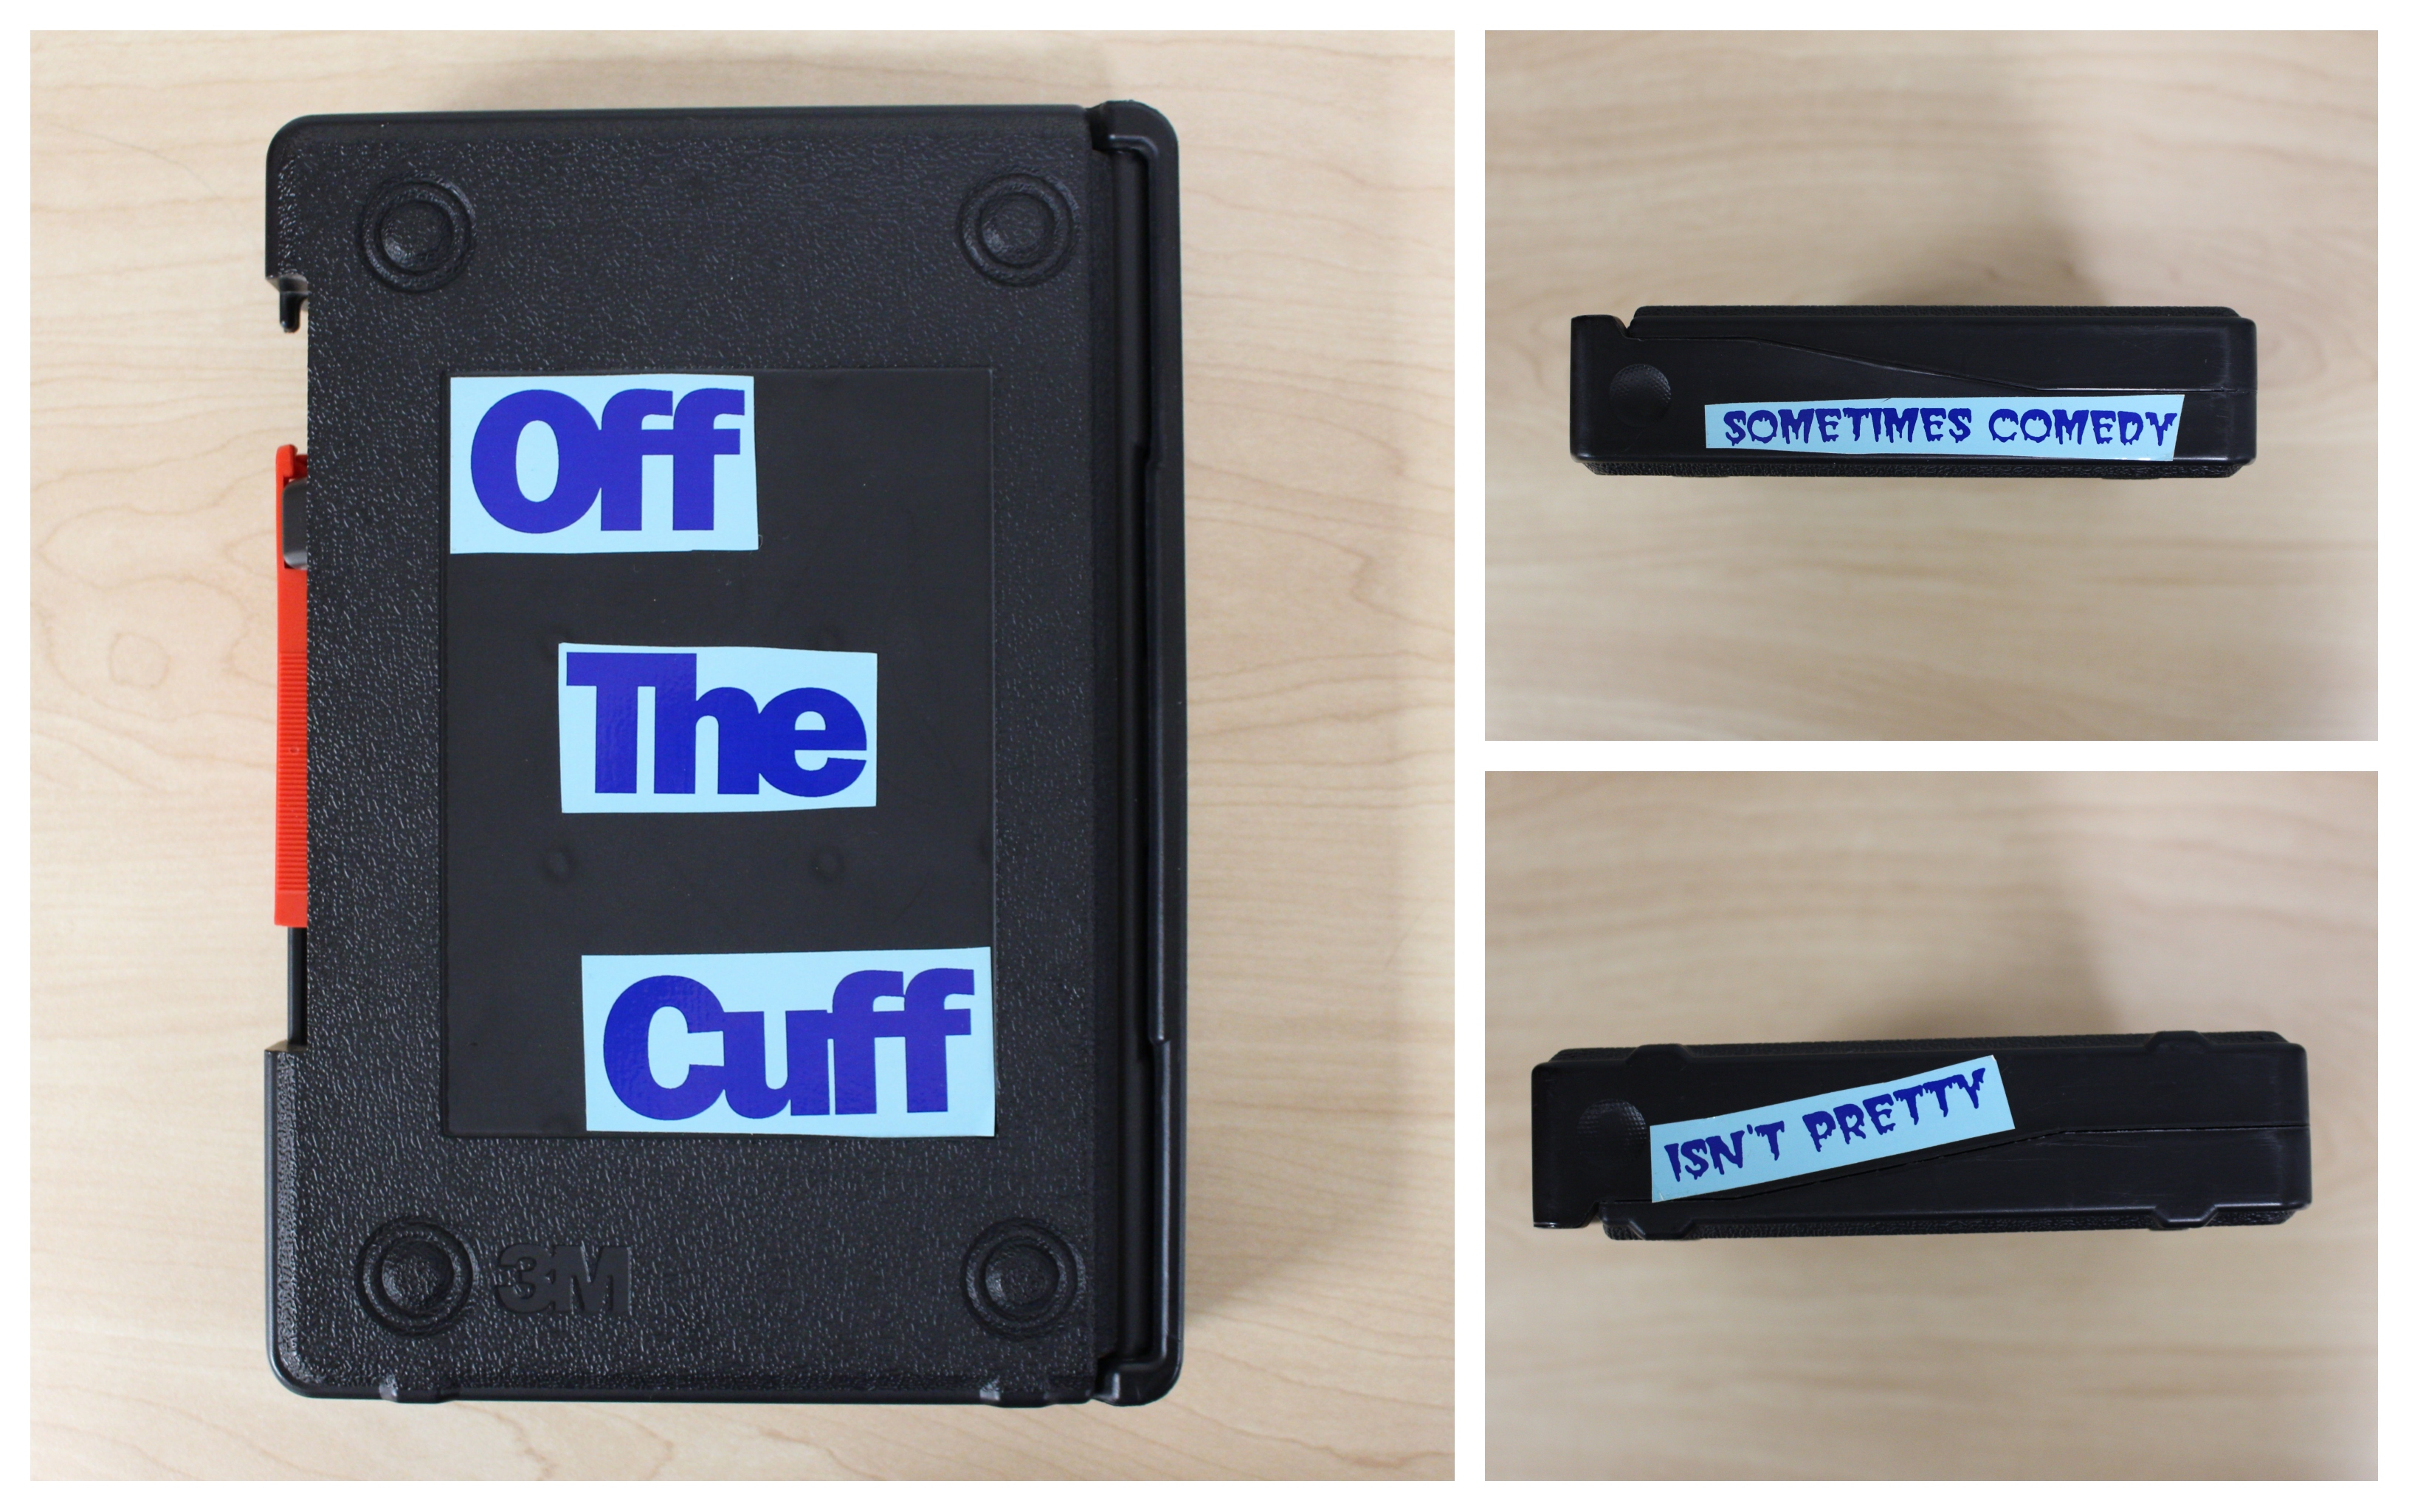 Photo collage of U-matic case with sticker that reads "Off the Cuff" on the front, "sometimes comedy" on one edge, and "isn't pretty" on the other edge